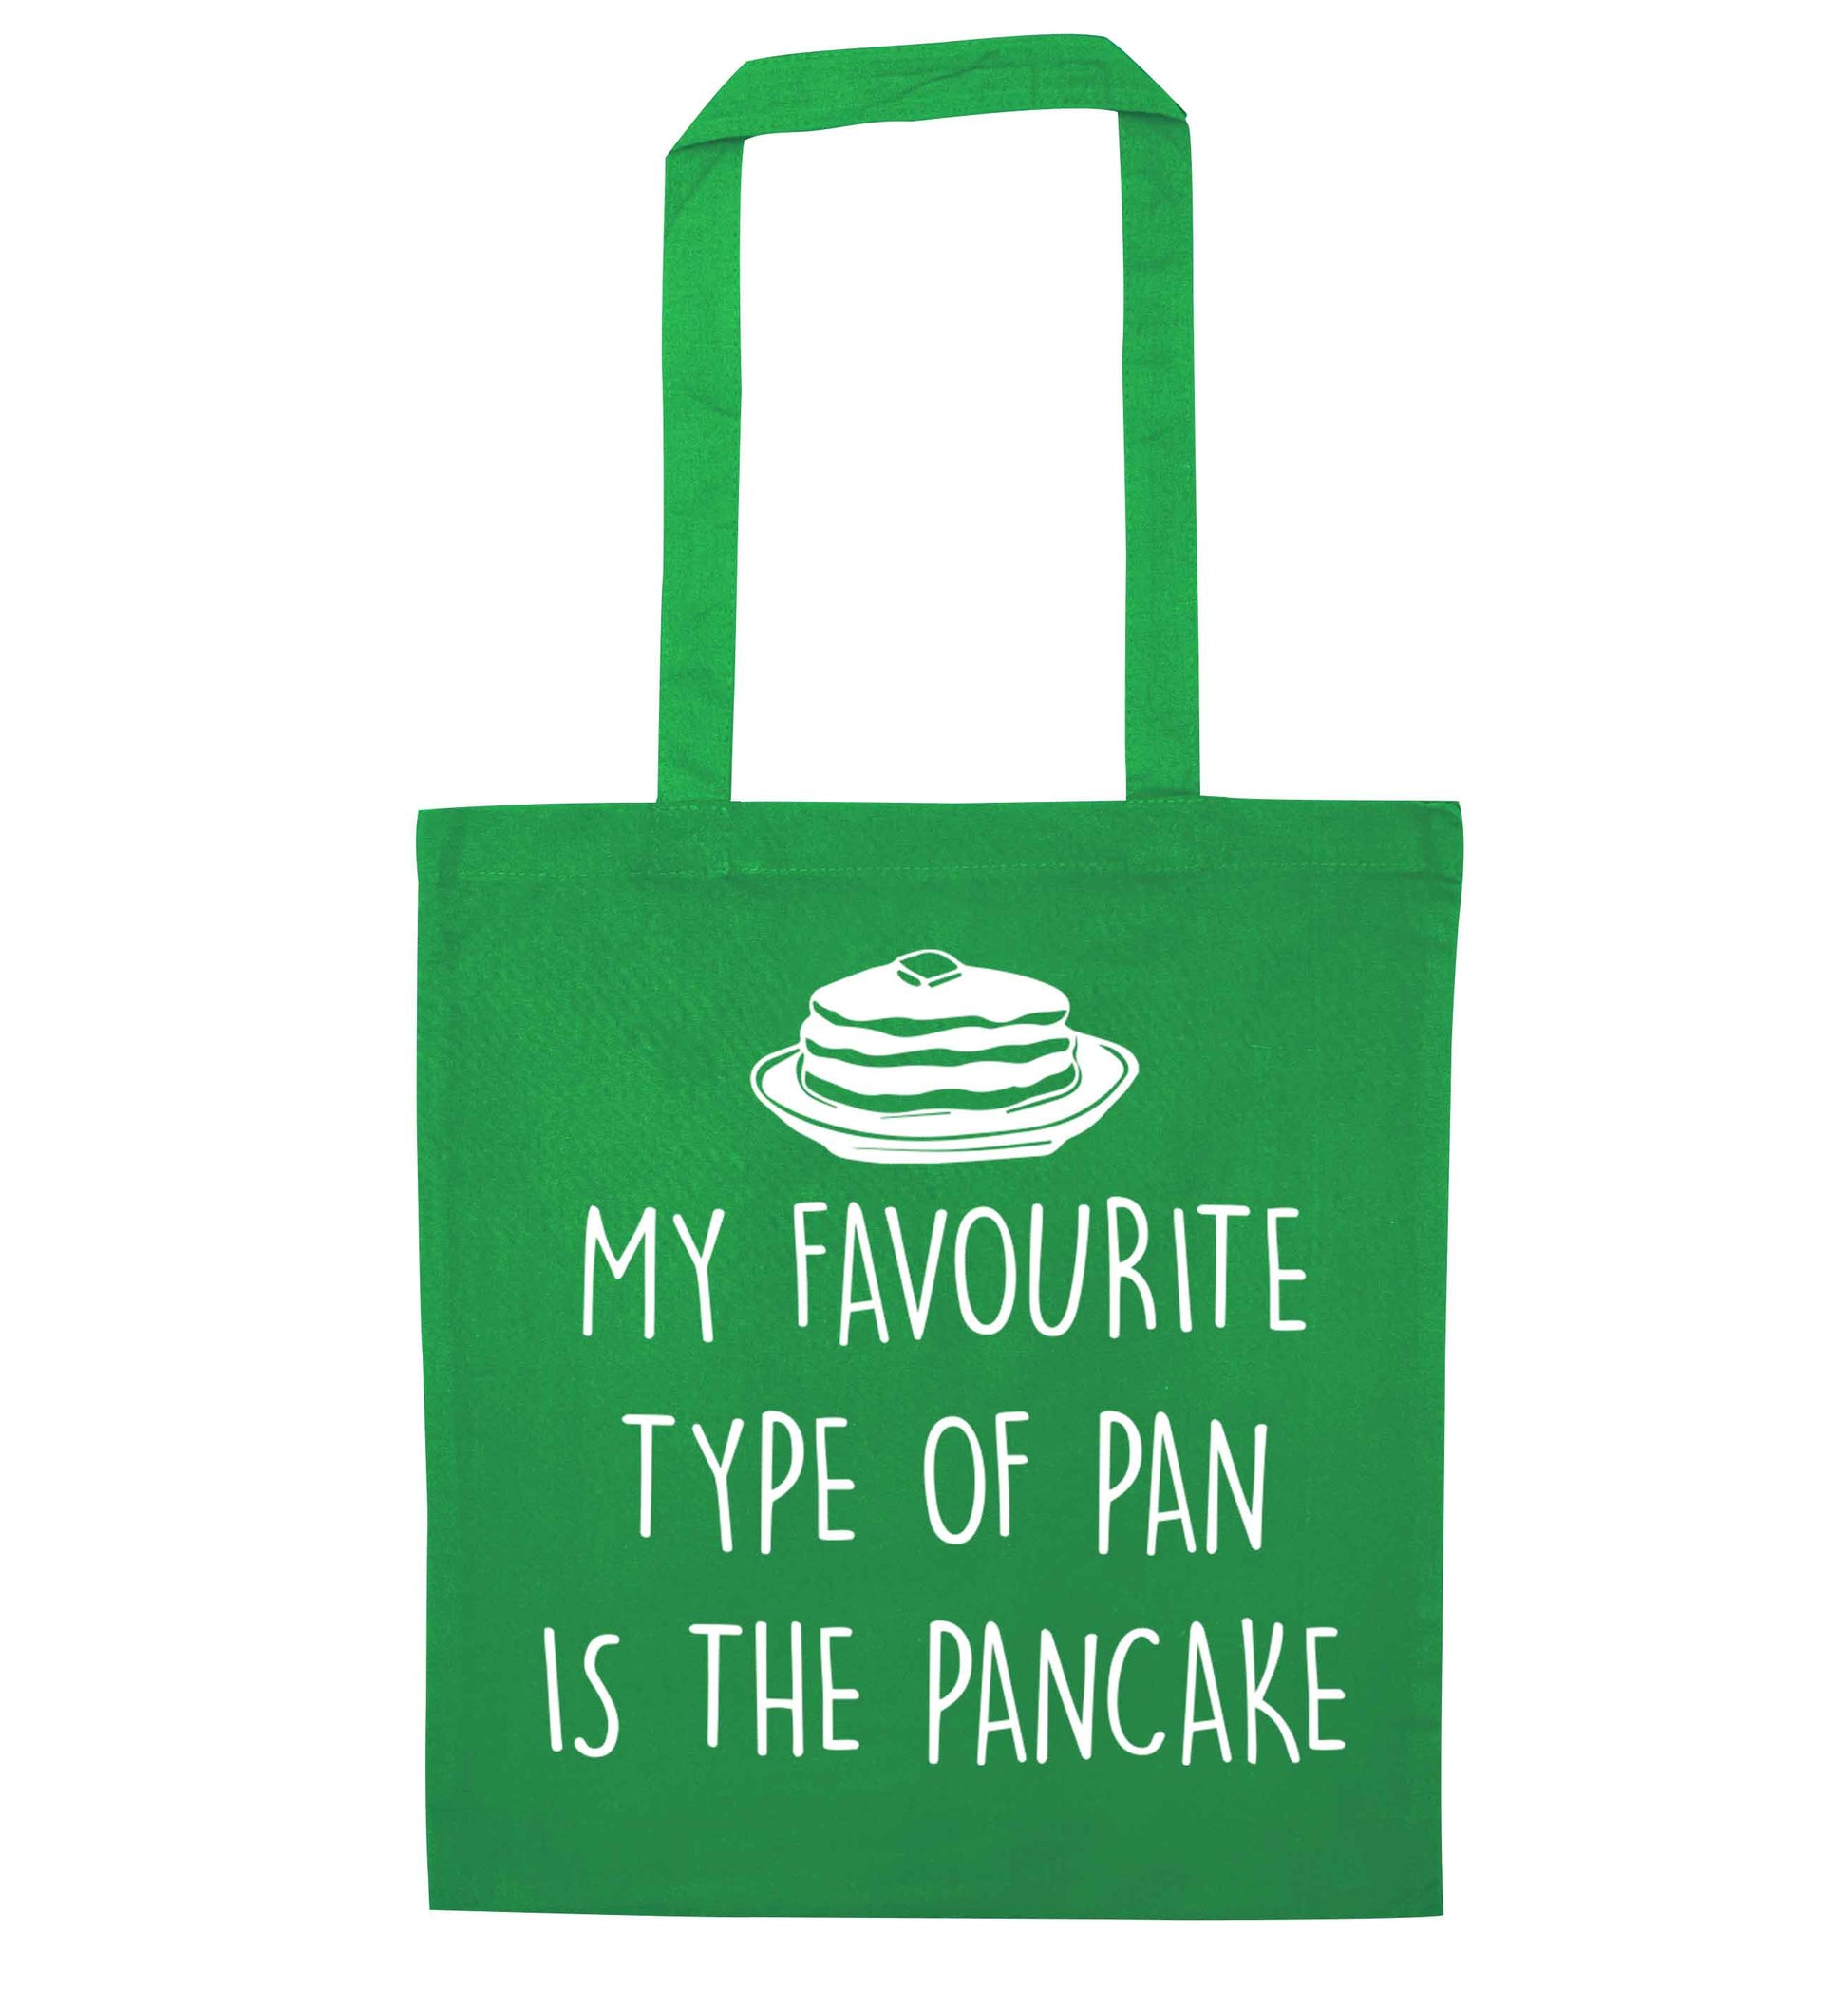 My favourite type of pan is the pancake green tote bag